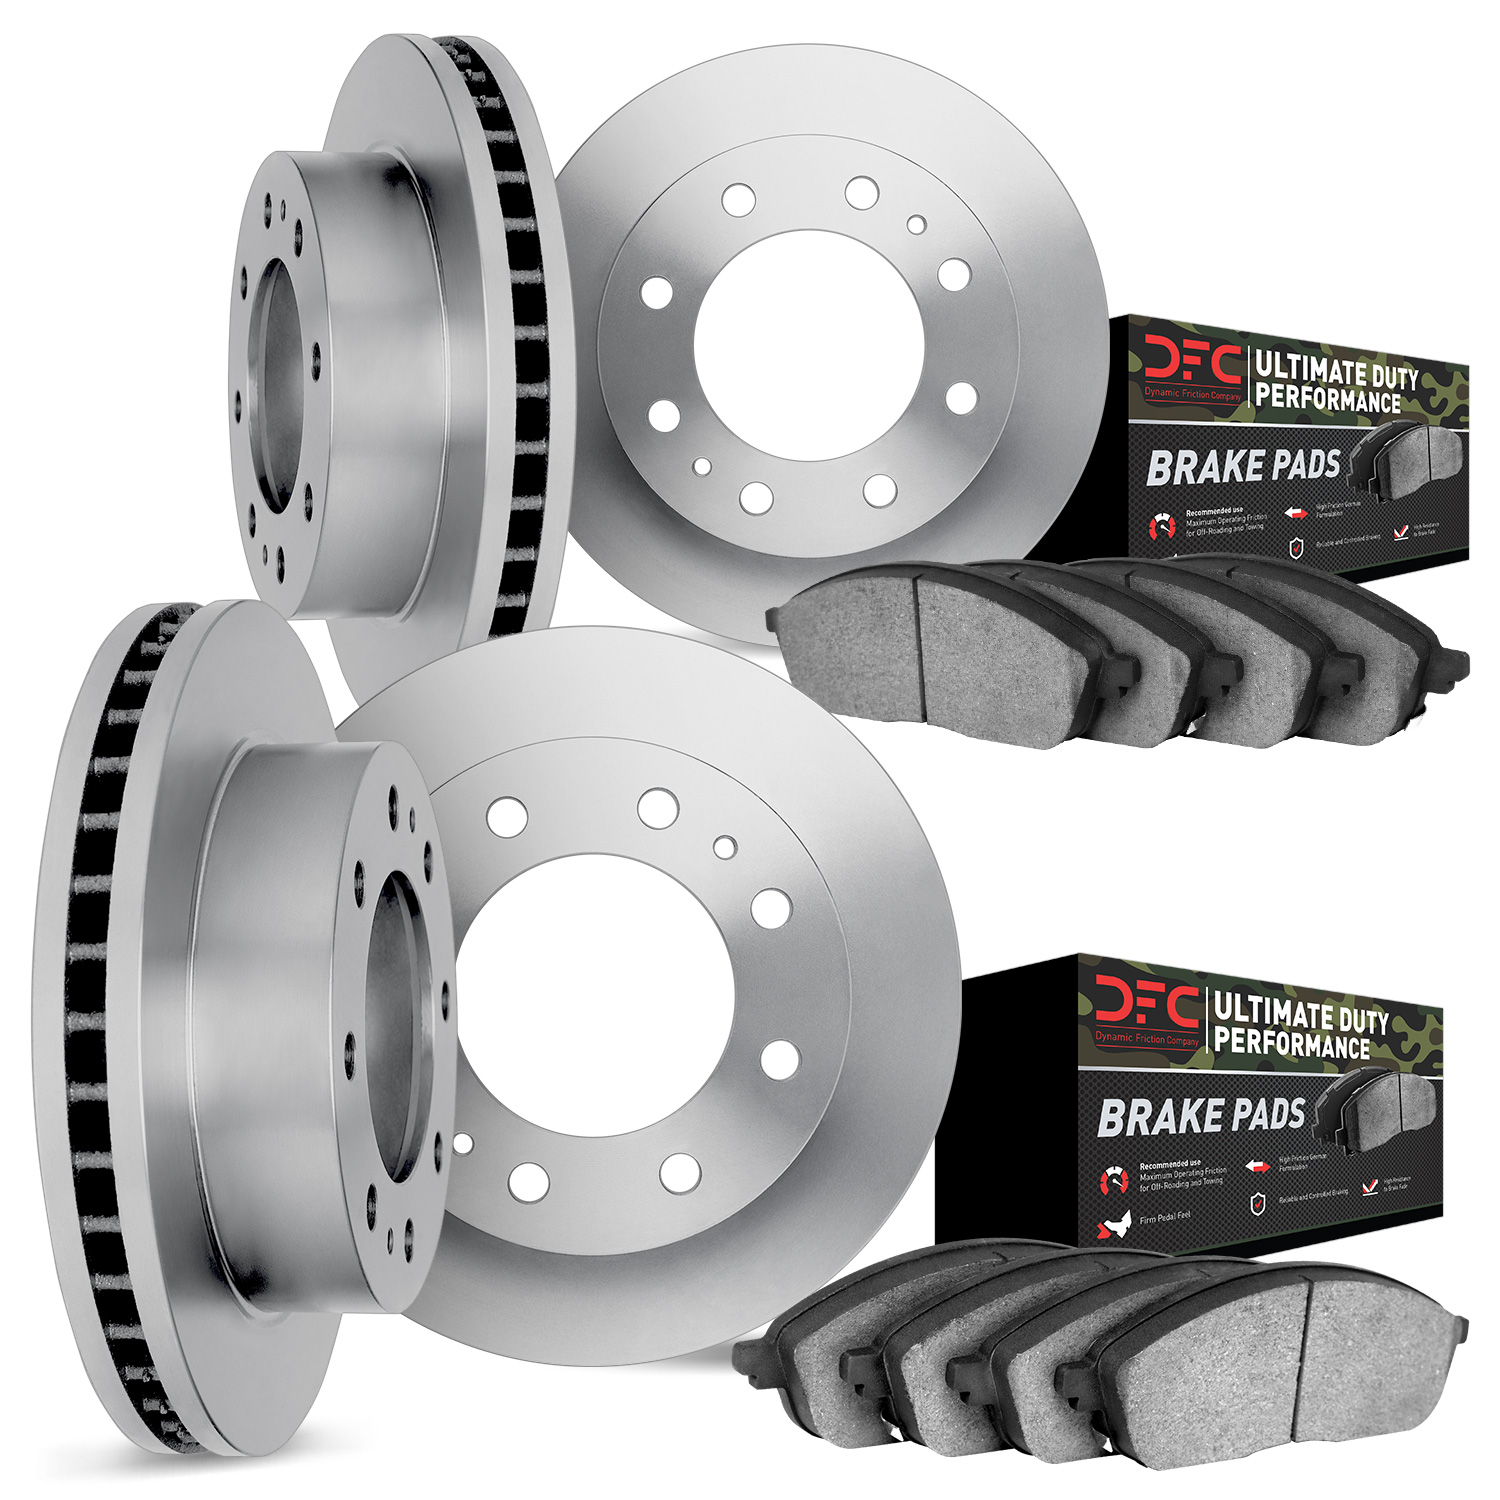 6404-54159 Brake Rotors with Ultimate-Duty Brake Pads, Fits Select Ford/Lincoln/Mercury/Mazda, Position: Front and Rear